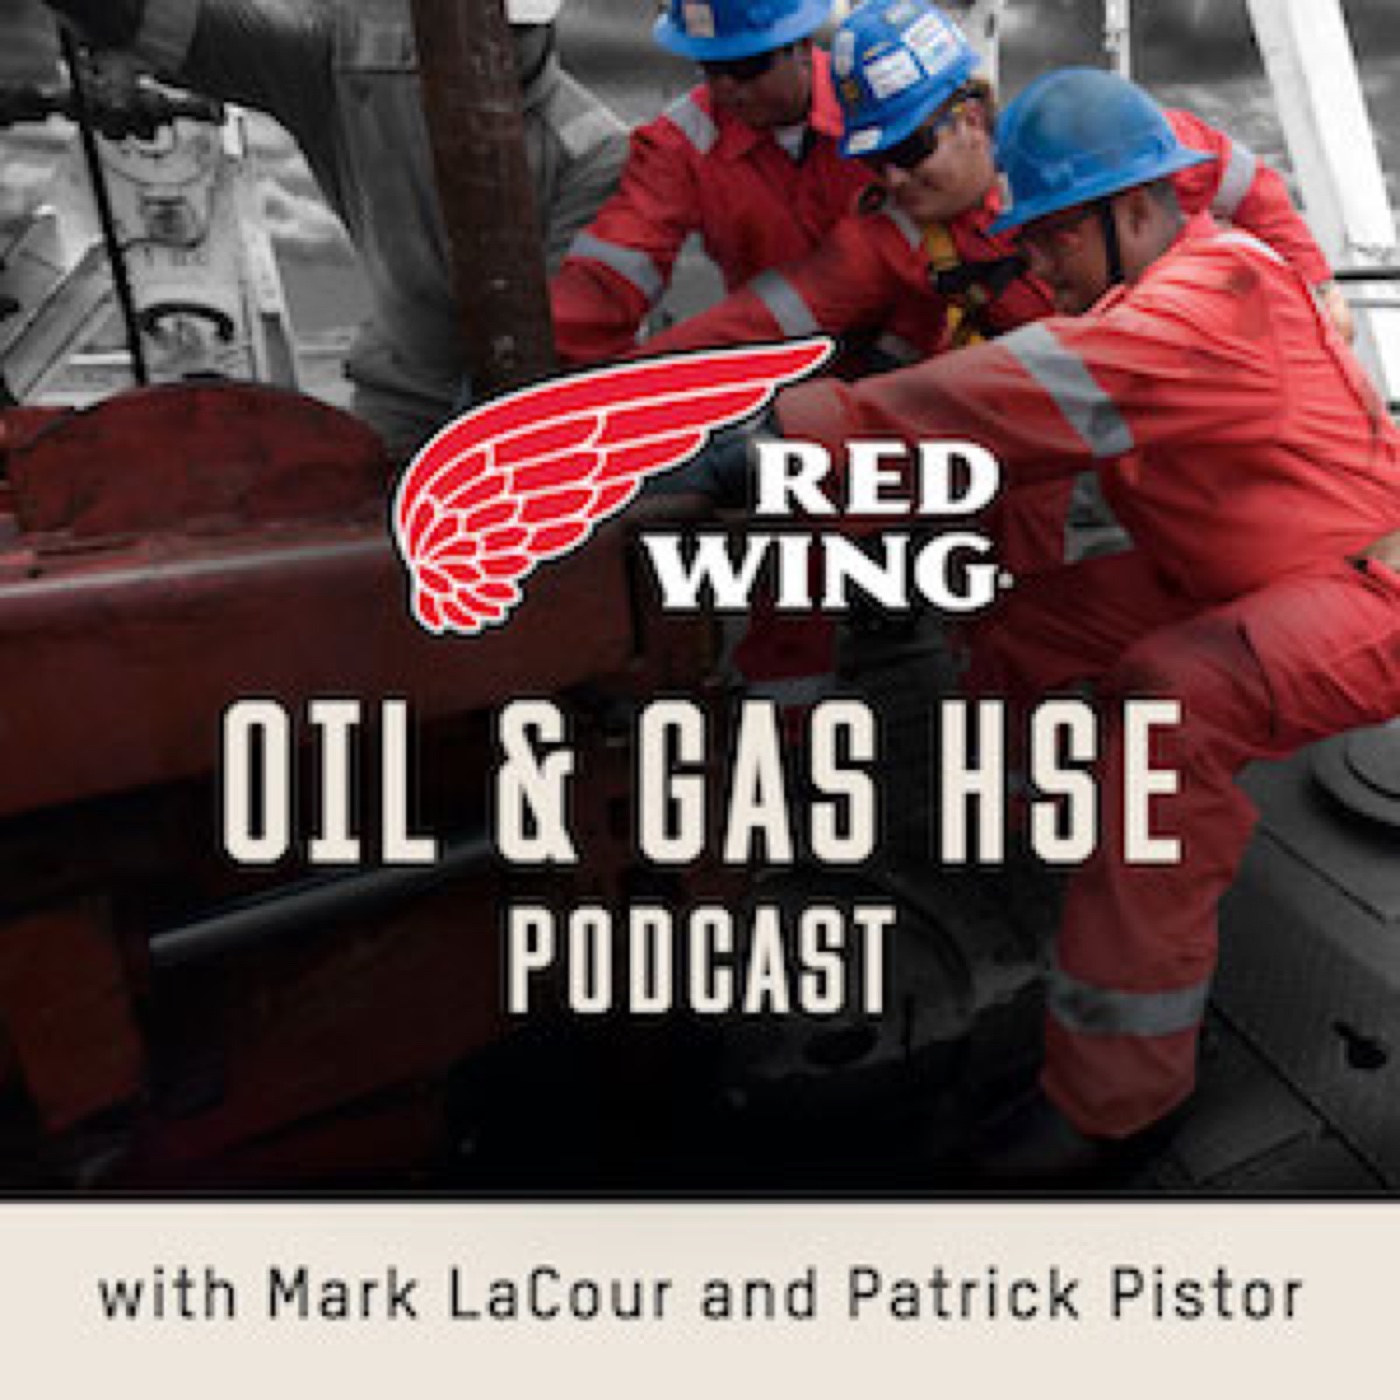 Red Wing's Oil and Gas HSE Podcast